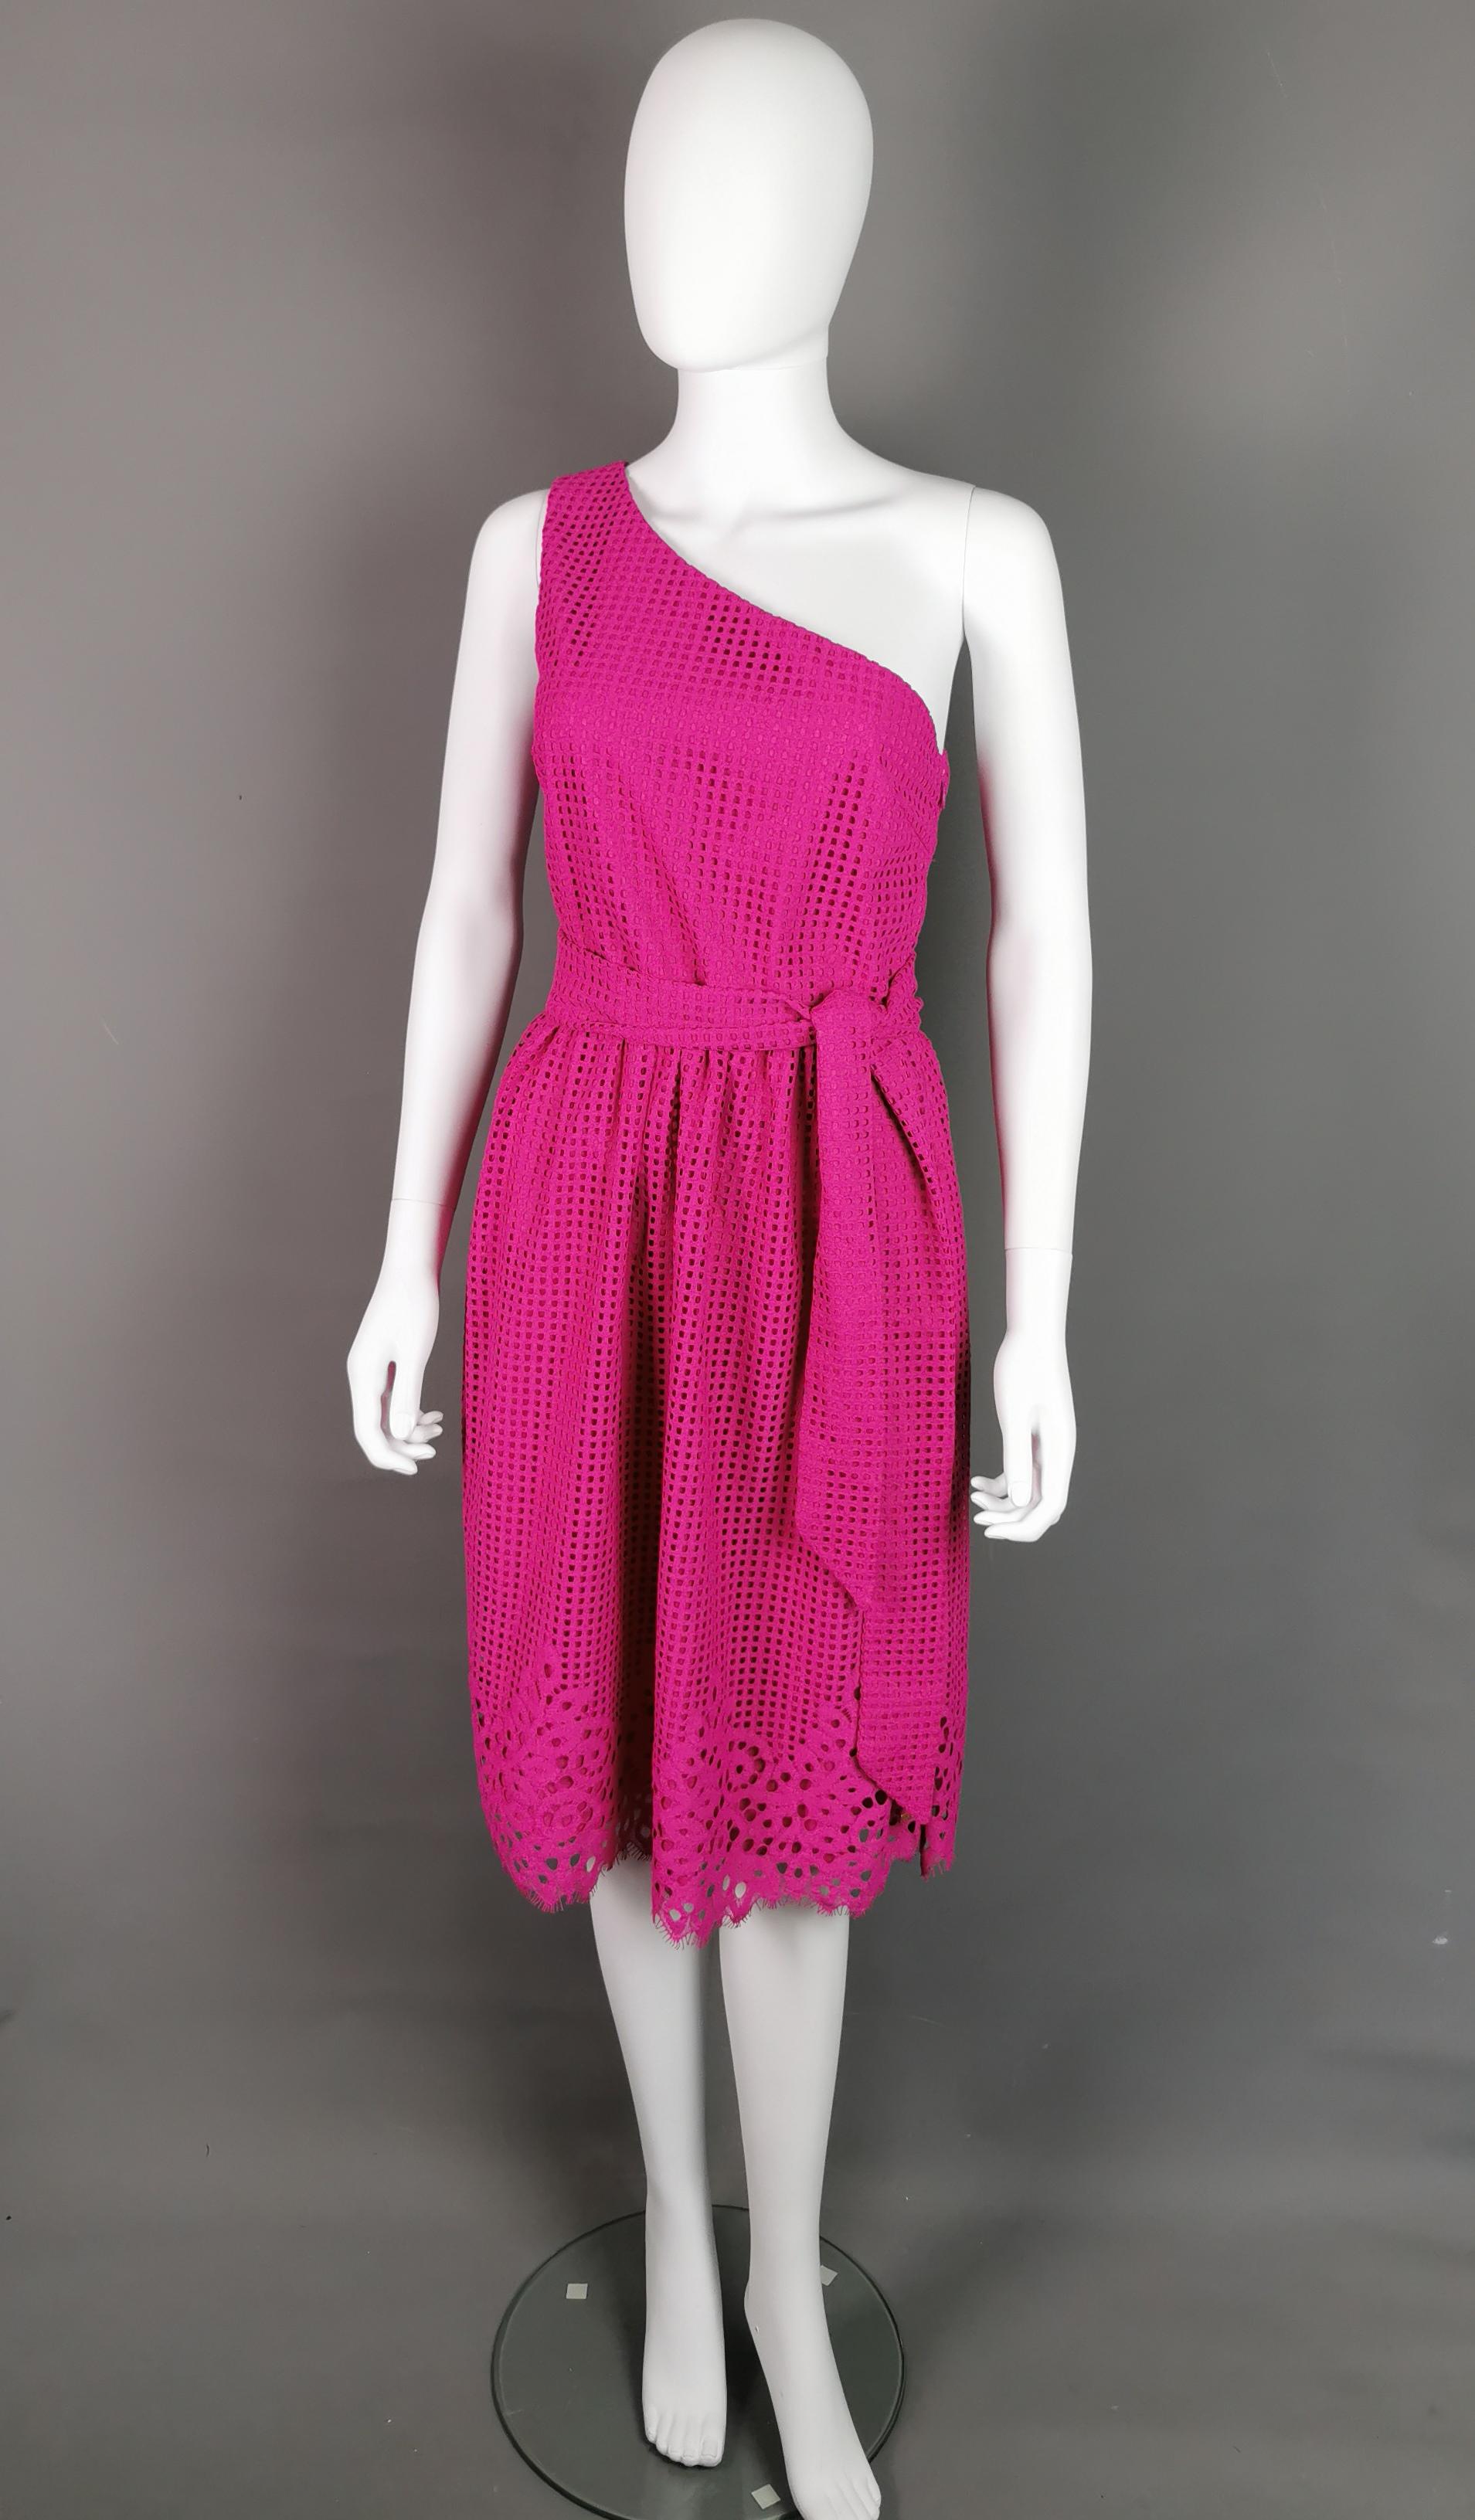 A gorgeous Tommy Hilfiger Helena one shoulder dress.

Pretty Entredeux lace made of stretch nylon in a magenta pink colour.

It is fully lined and has a tie waist belt.

This item still has the original tags and does not appear to have been worn.

A